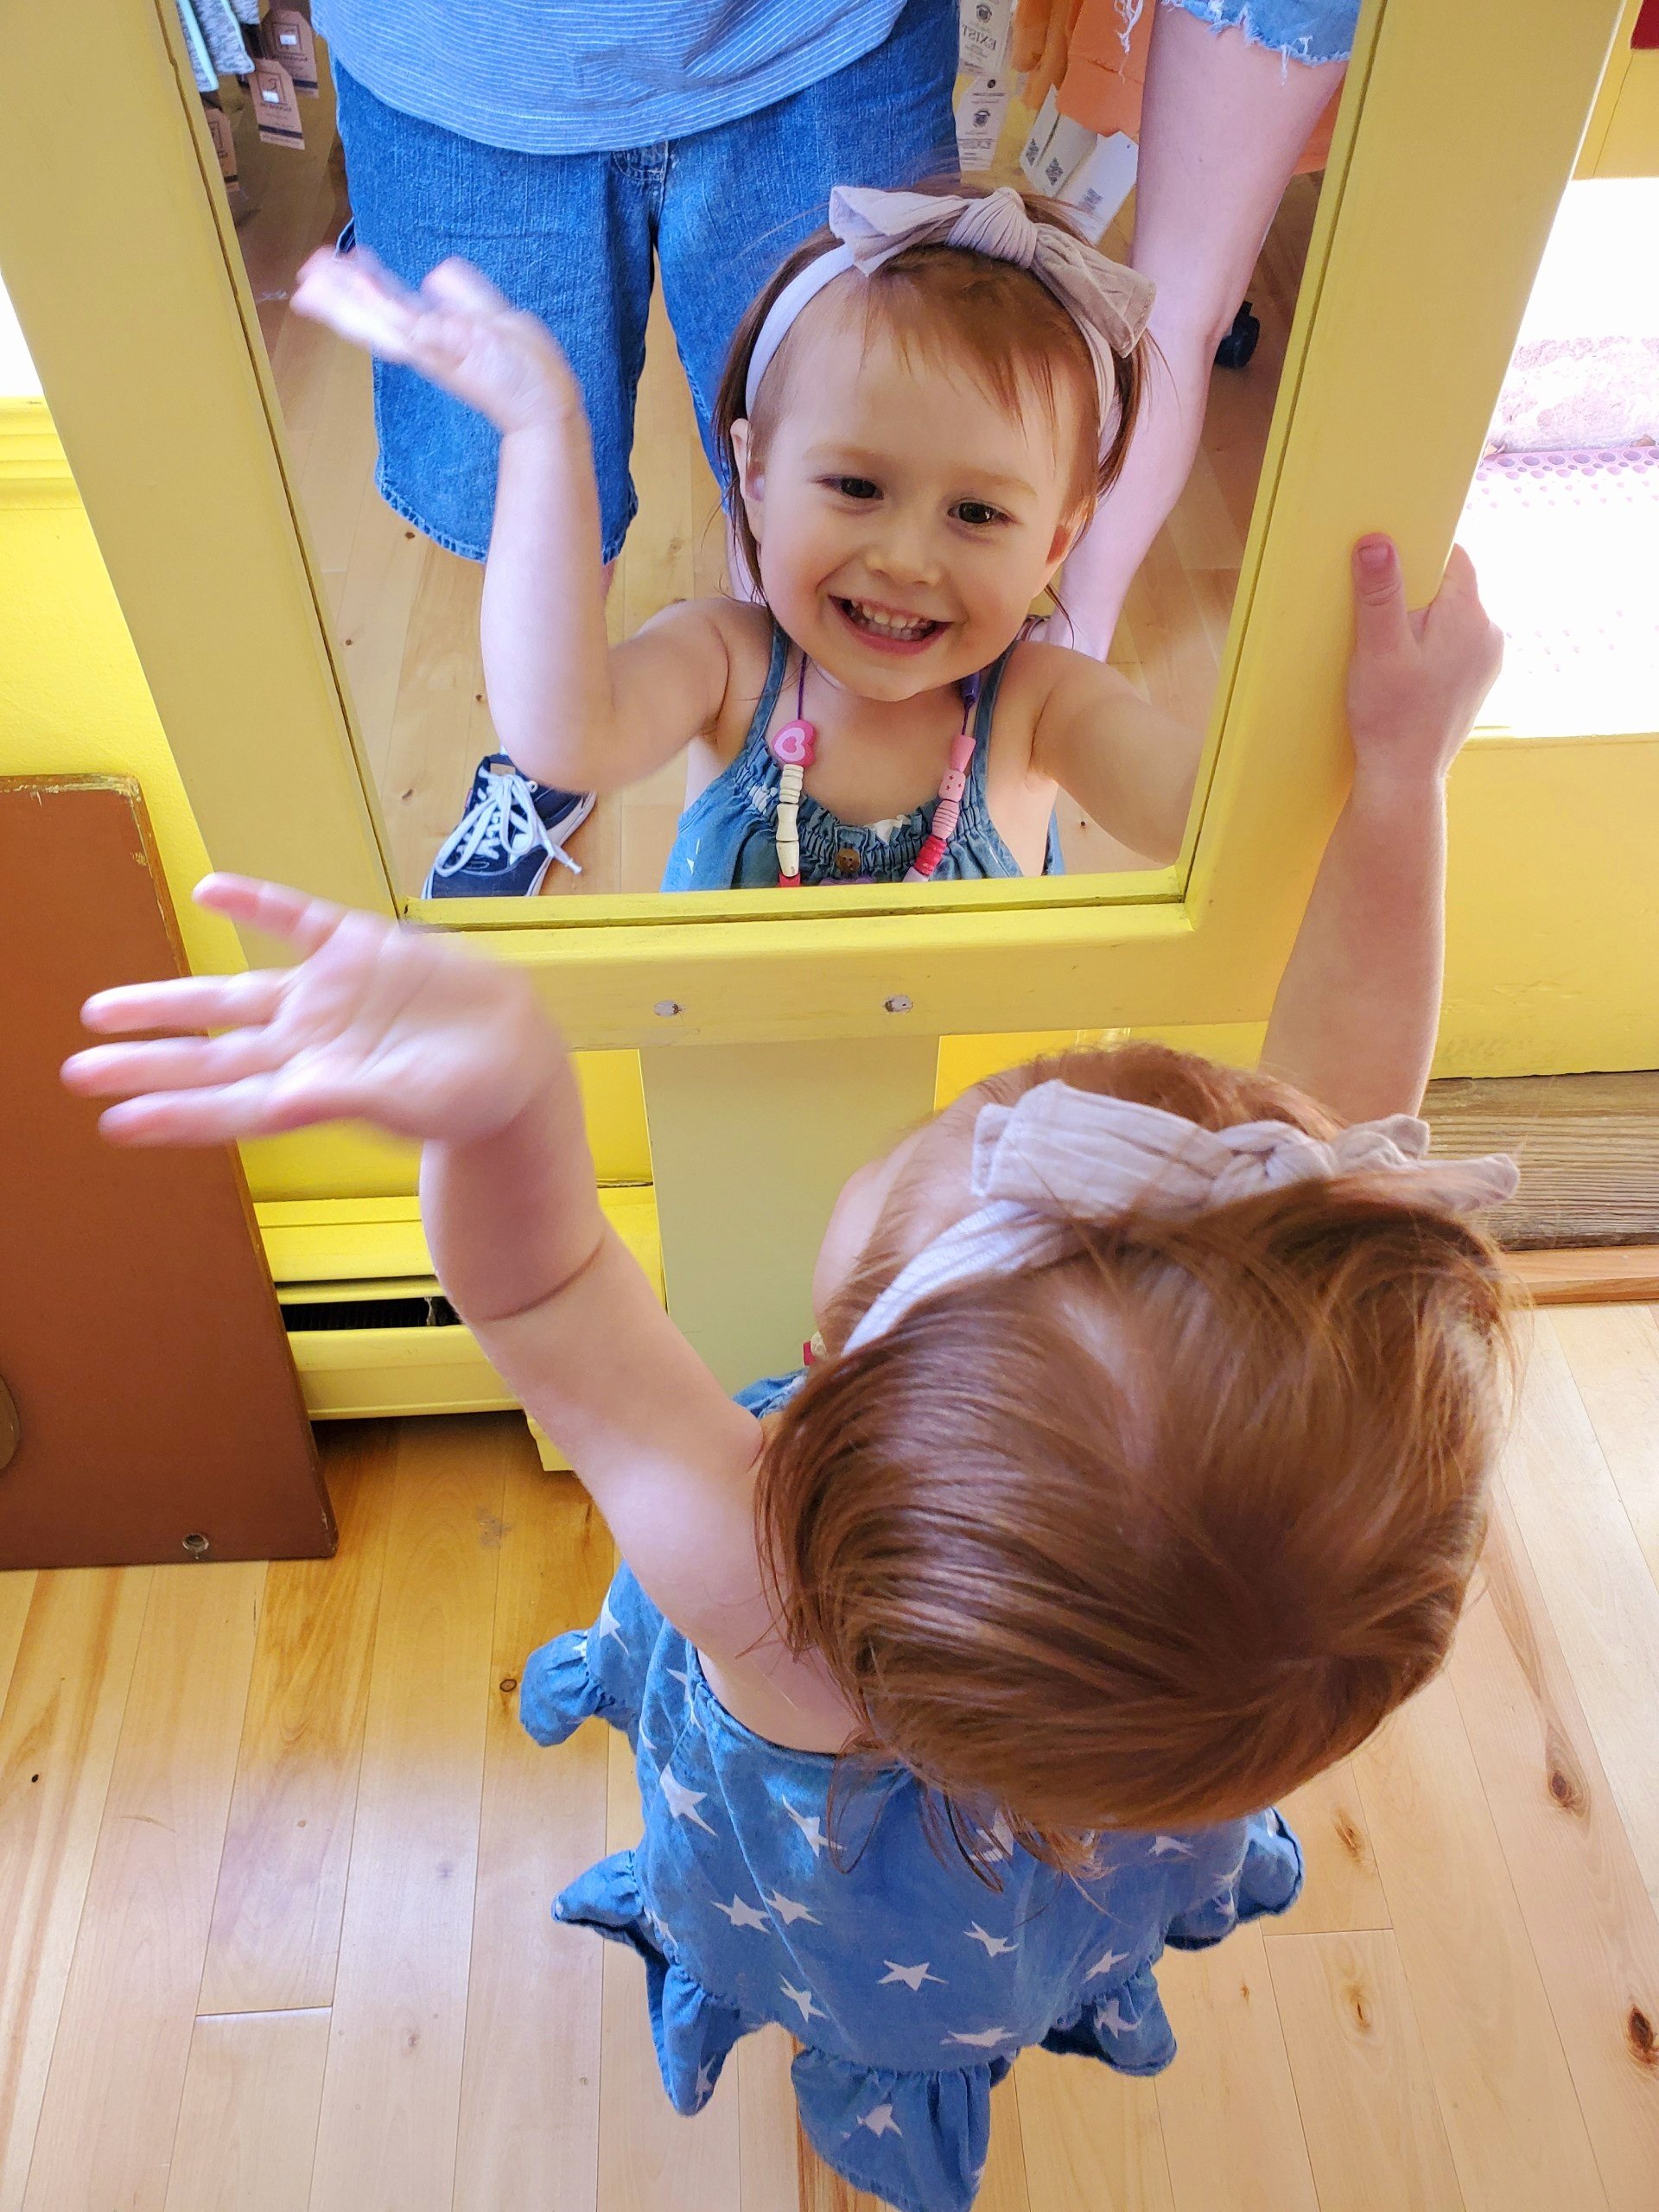 My Granddaughter Playing in the Mirror -SOLD